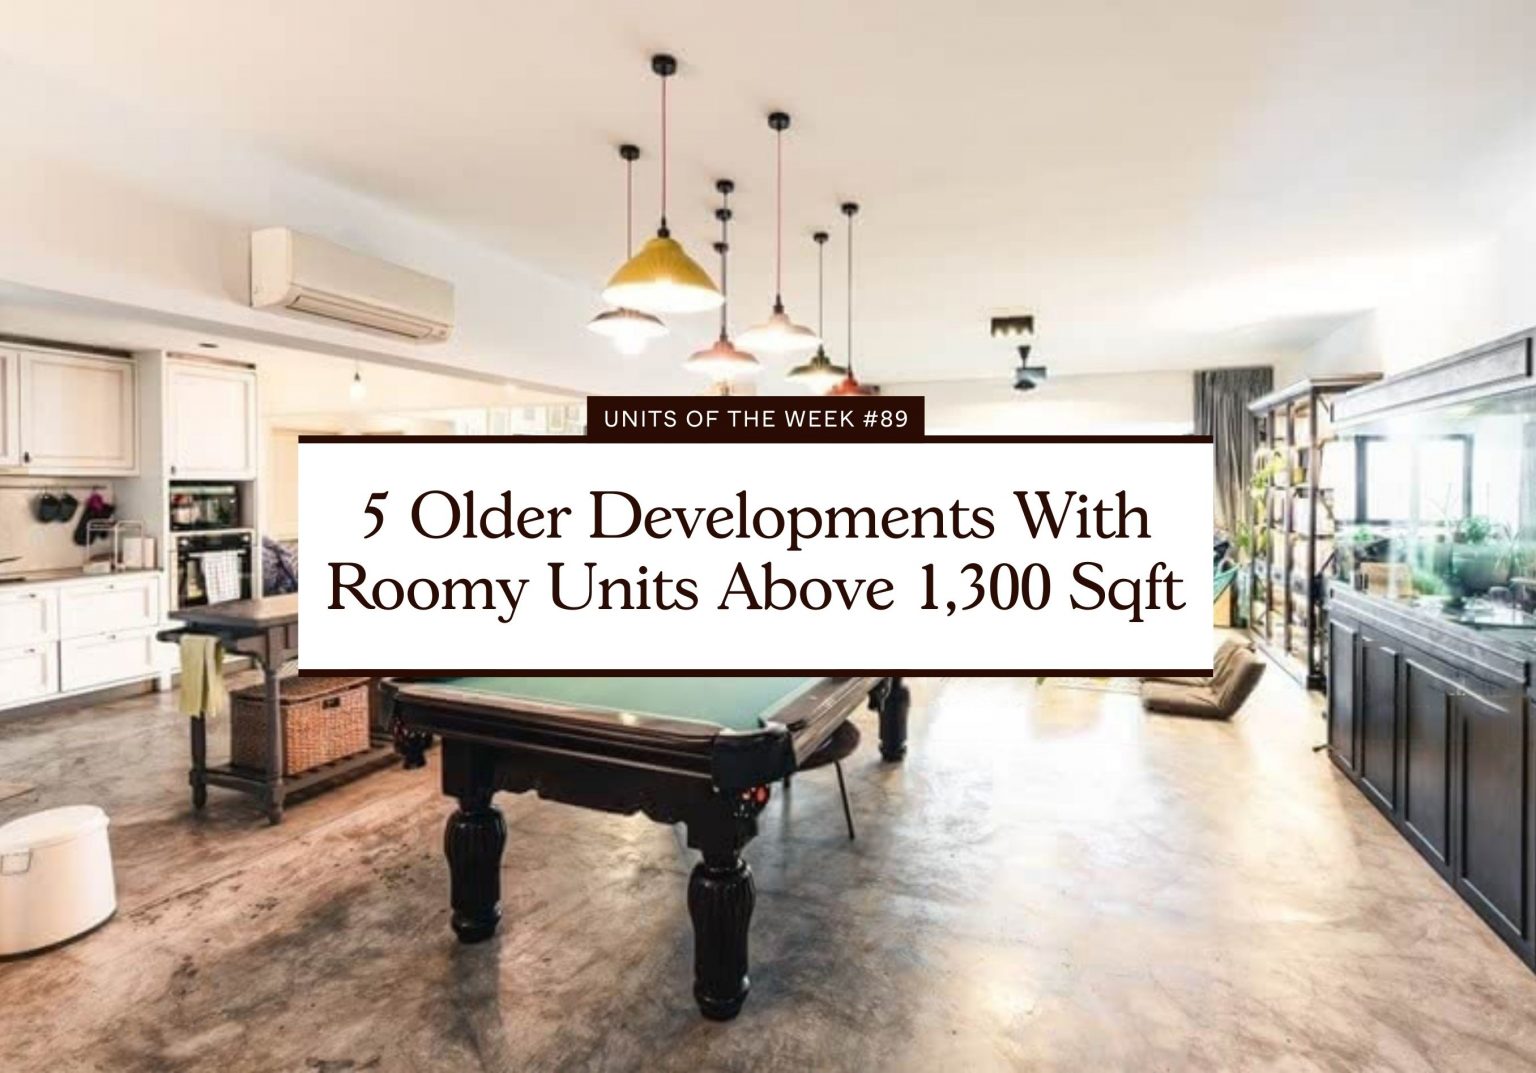 5 older developments with roomy units above 1300 sqft